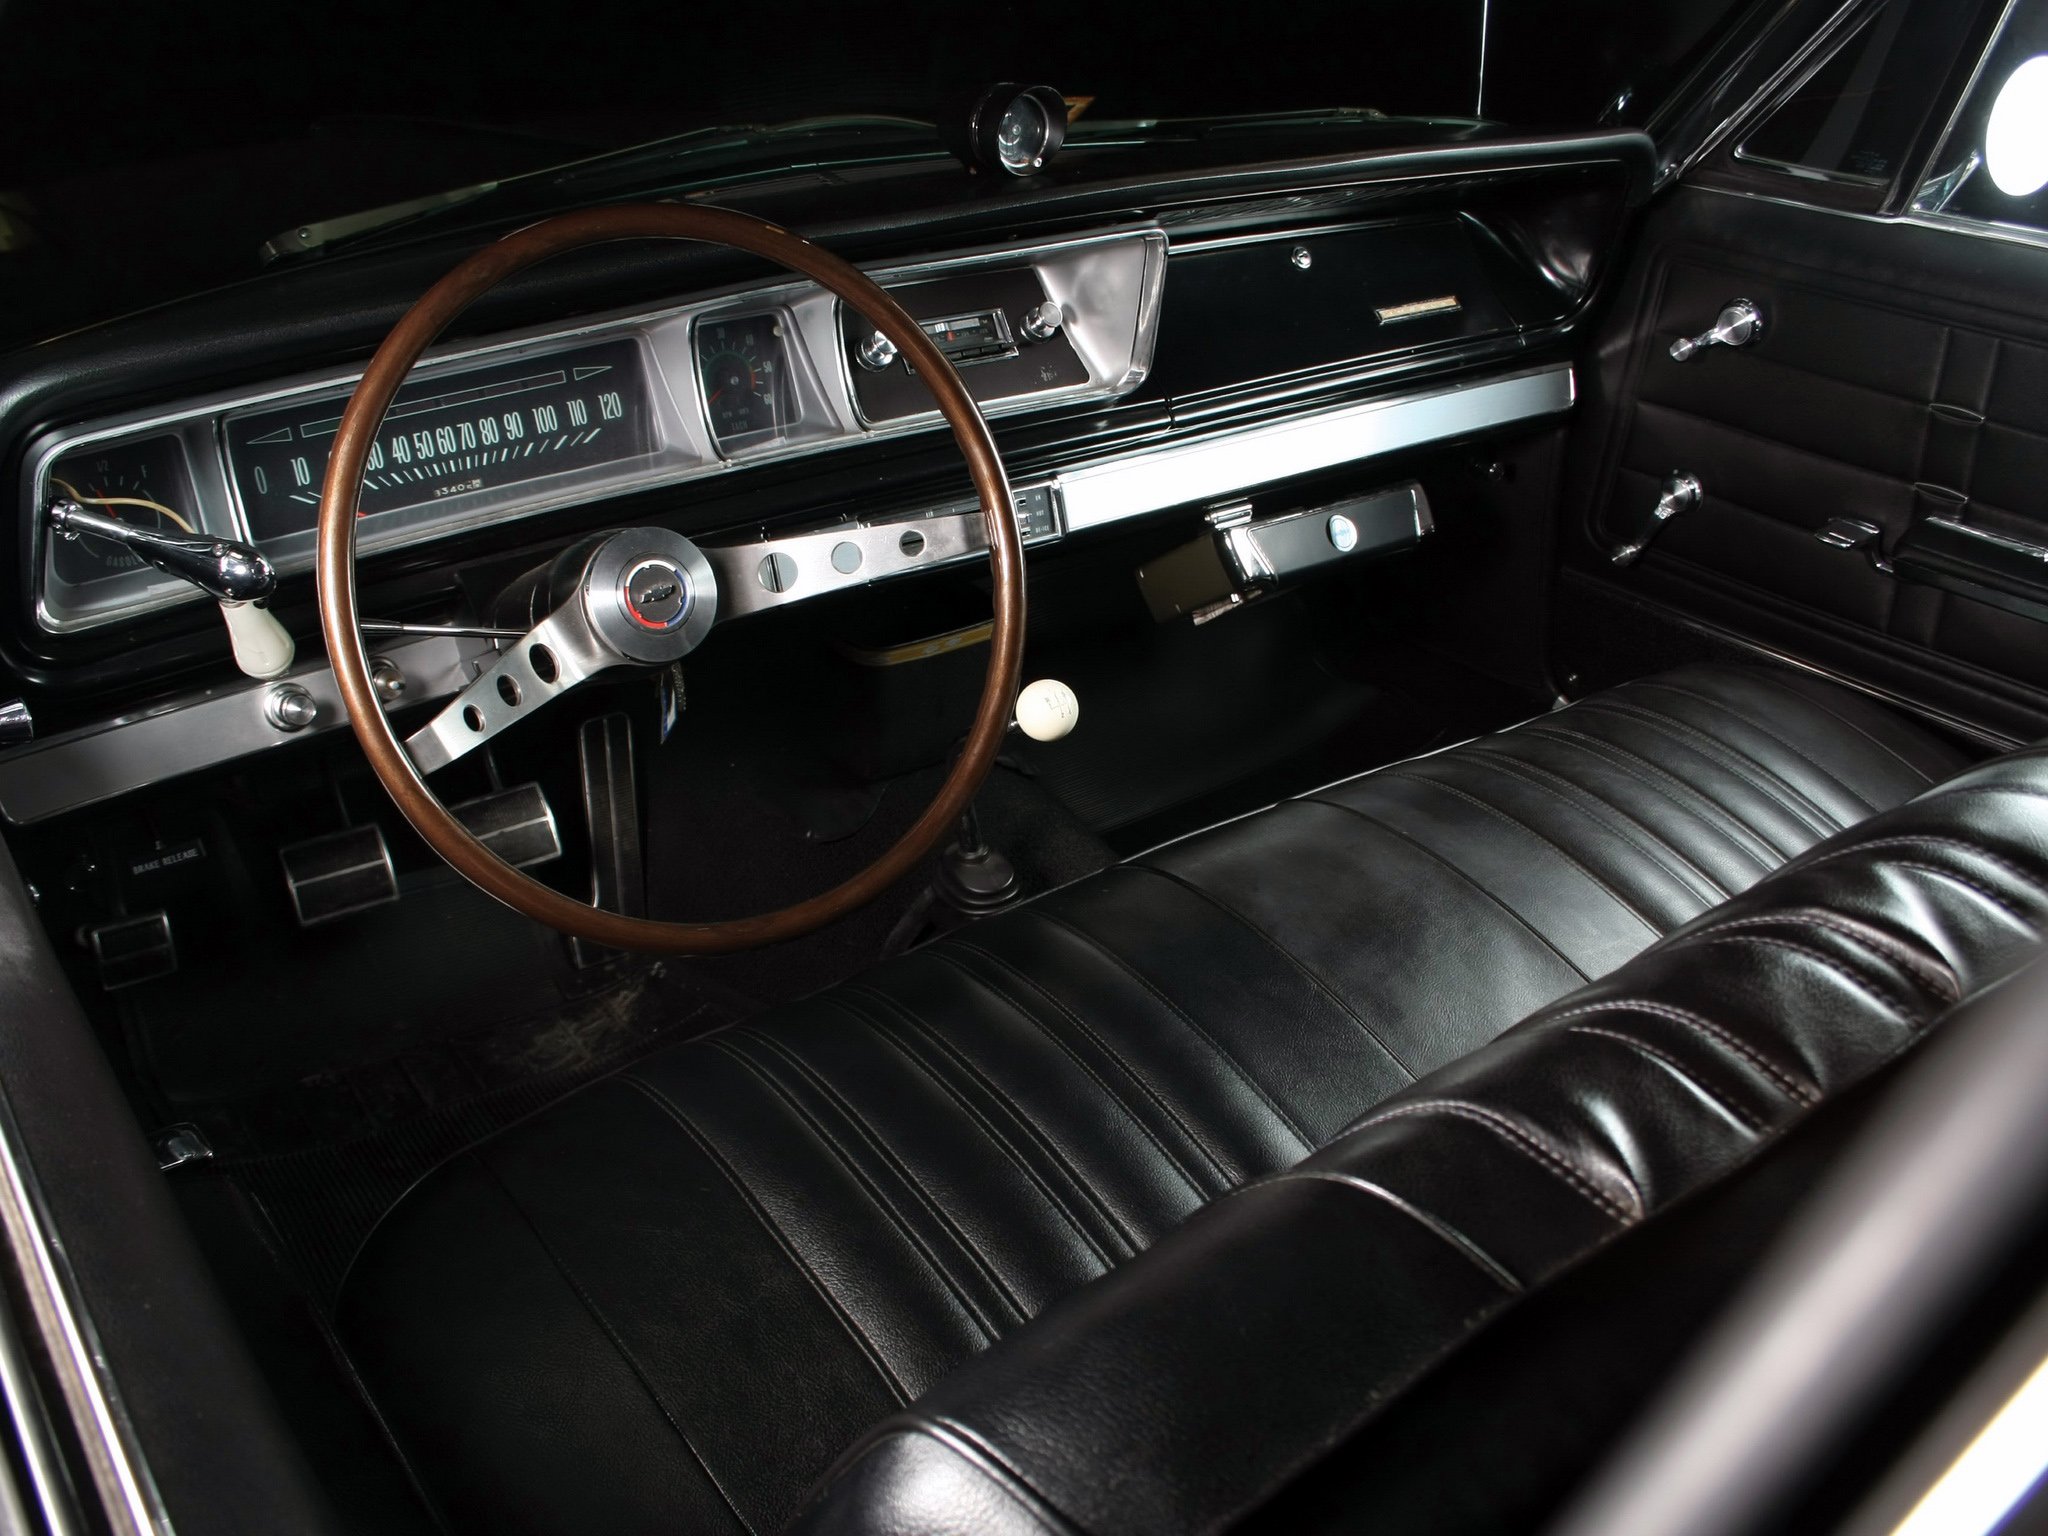 1966, Chevrolet, Impala, 396, 325hp, Sport, Coupe, Classic, Muscle, Interior Wallpaper